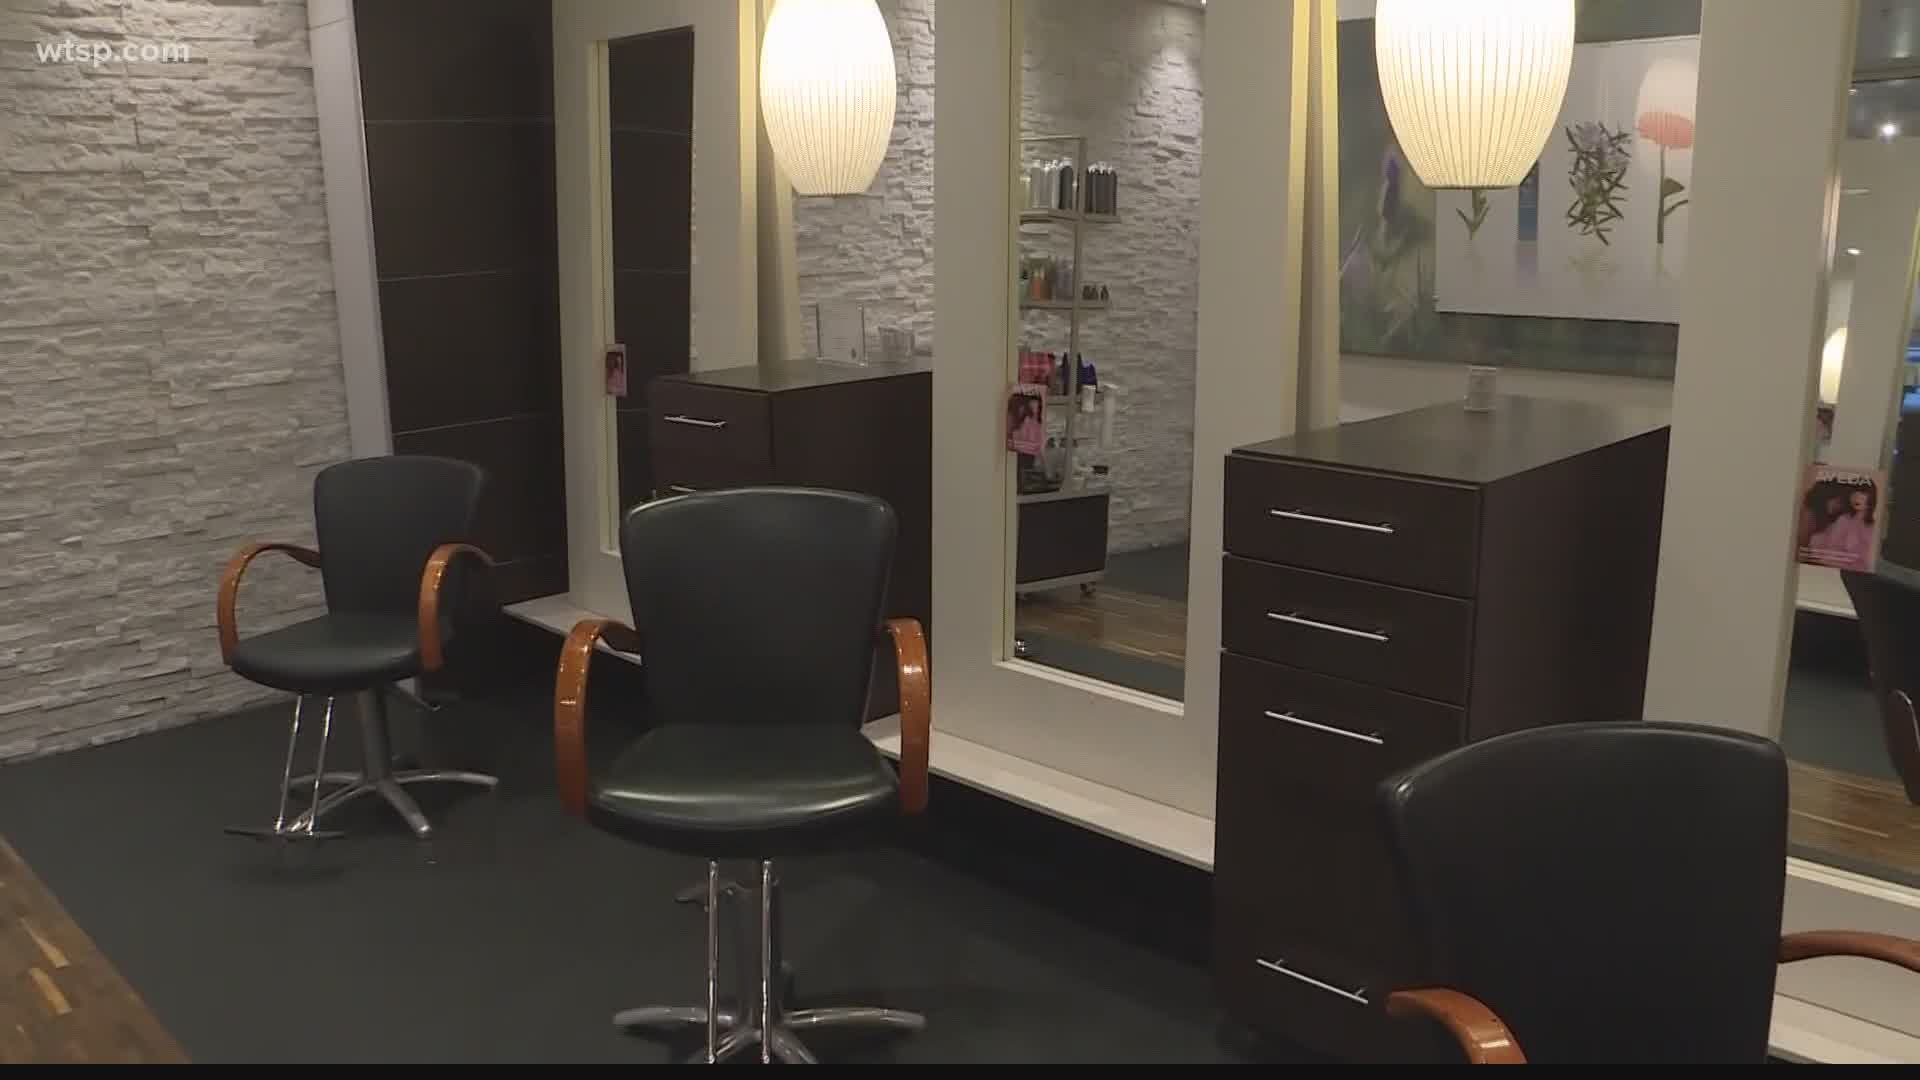 Gov. Ron Desantis announced that starting May 11, barbershops, hair salons, and nail salons can reopen after being shut down because of the pandemic.